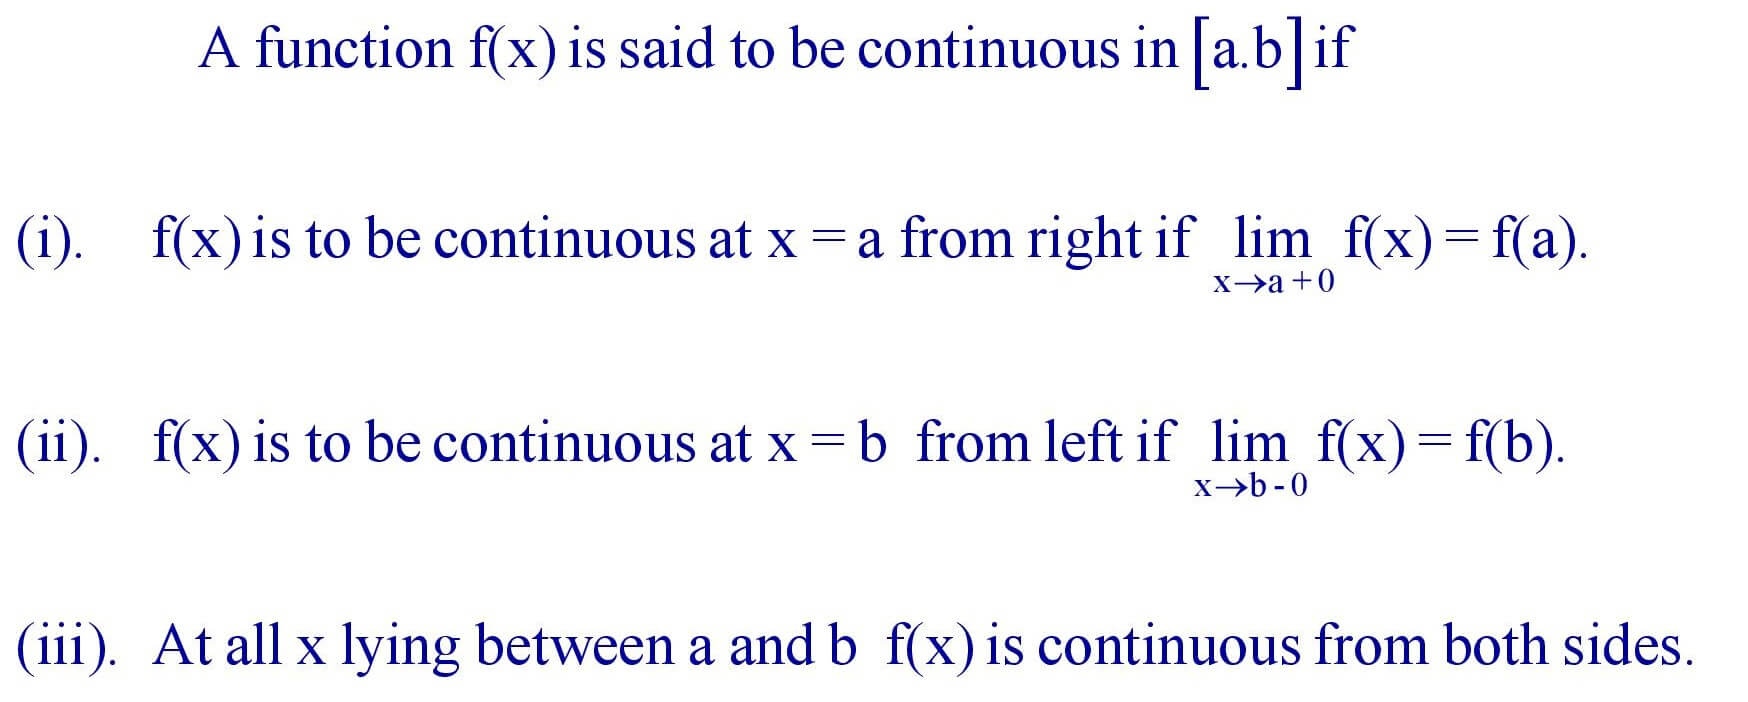 Continuity in an interval